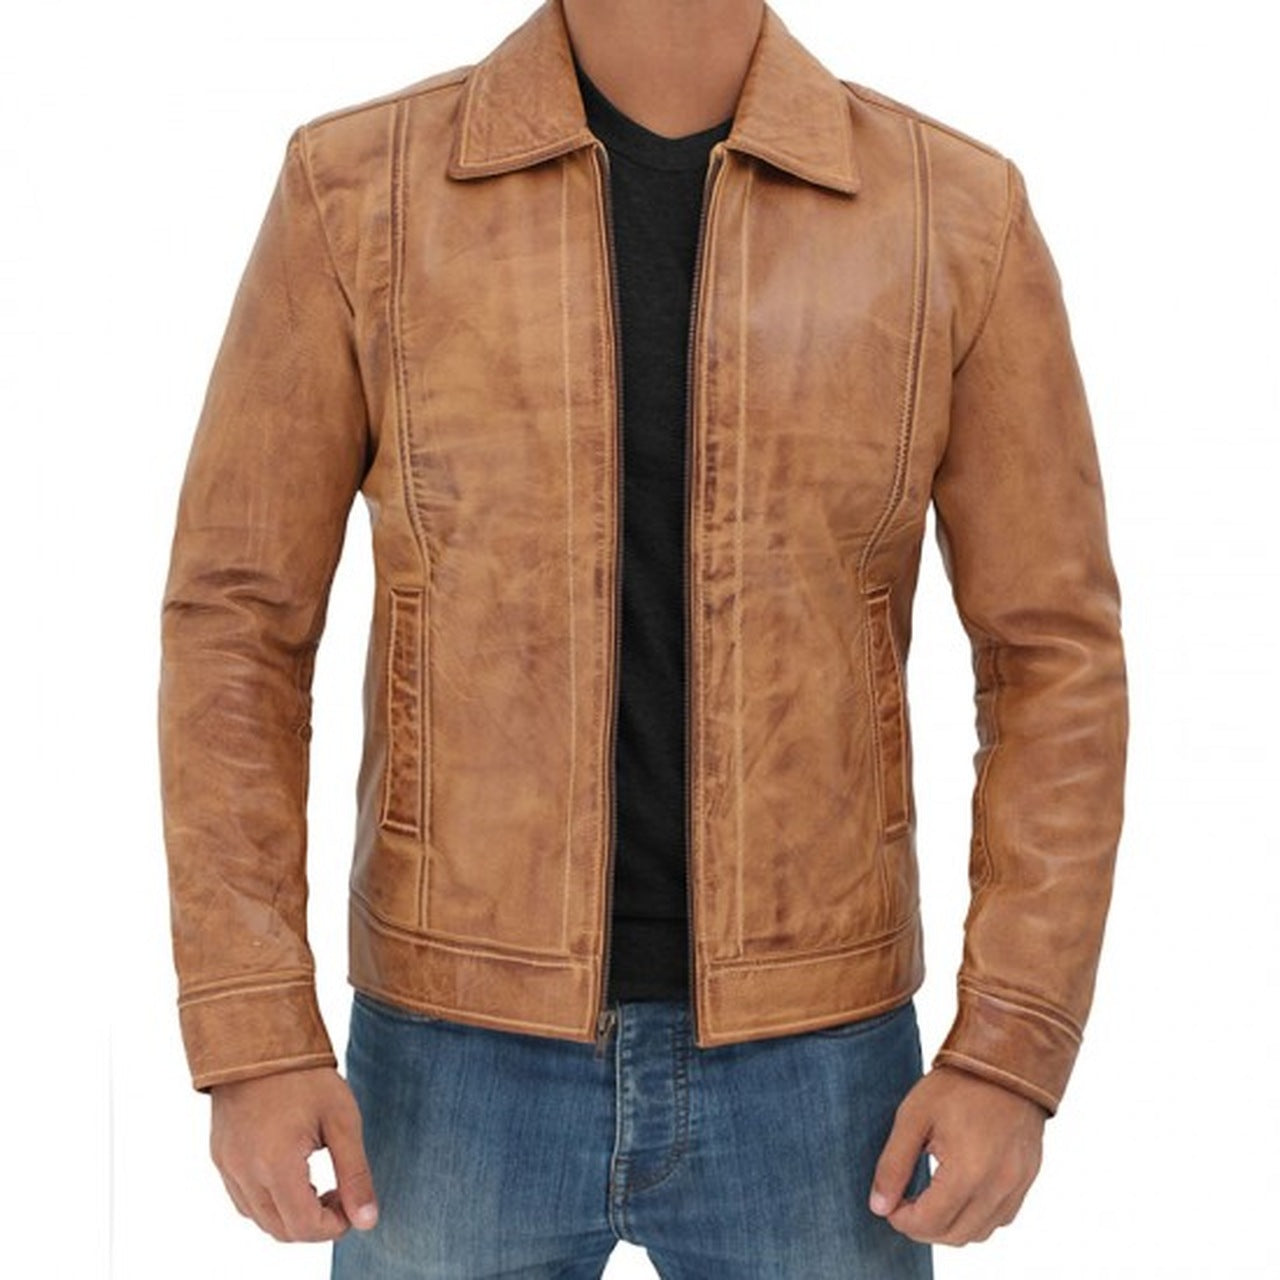 Casual Stylish Camel Brown Fitted Biker Leather Mens Jacket - Leather Jacket